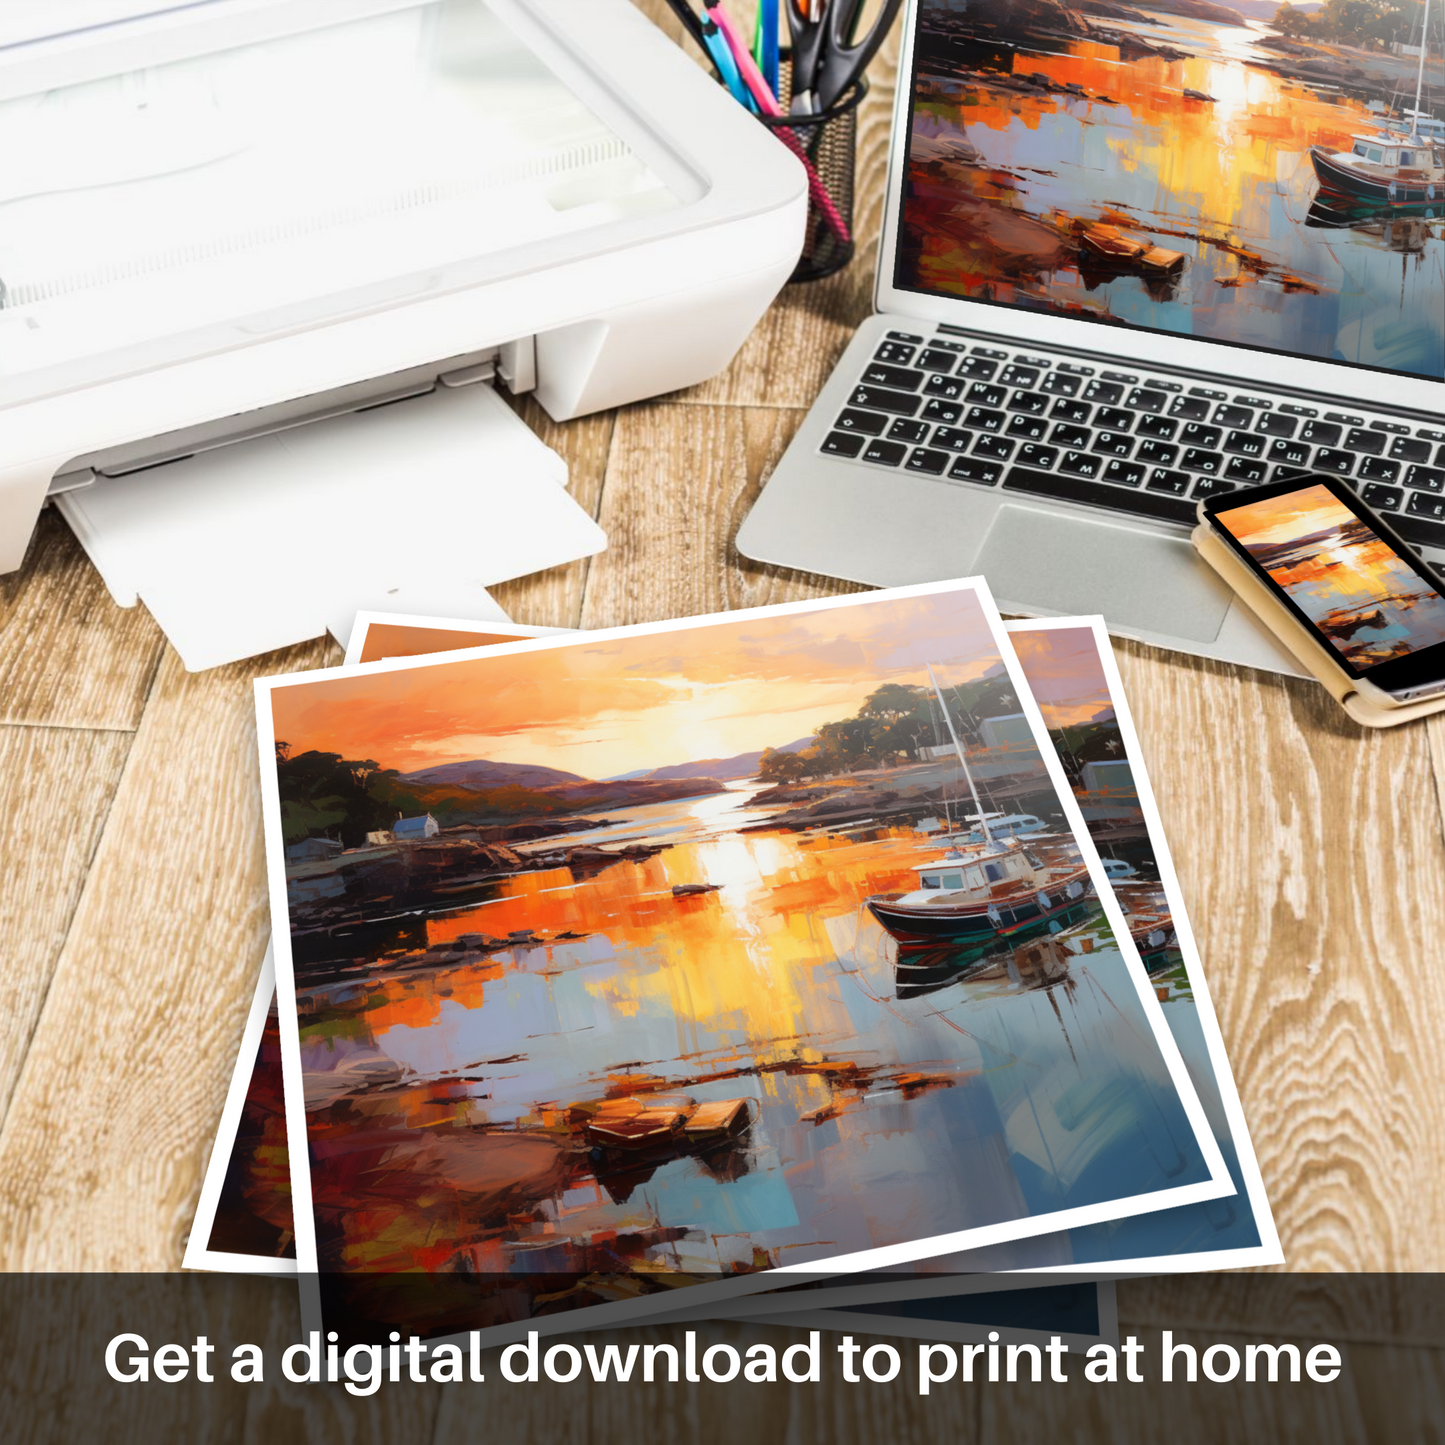 Downloadable and printable picture of Isleornsay Harbour at sunset